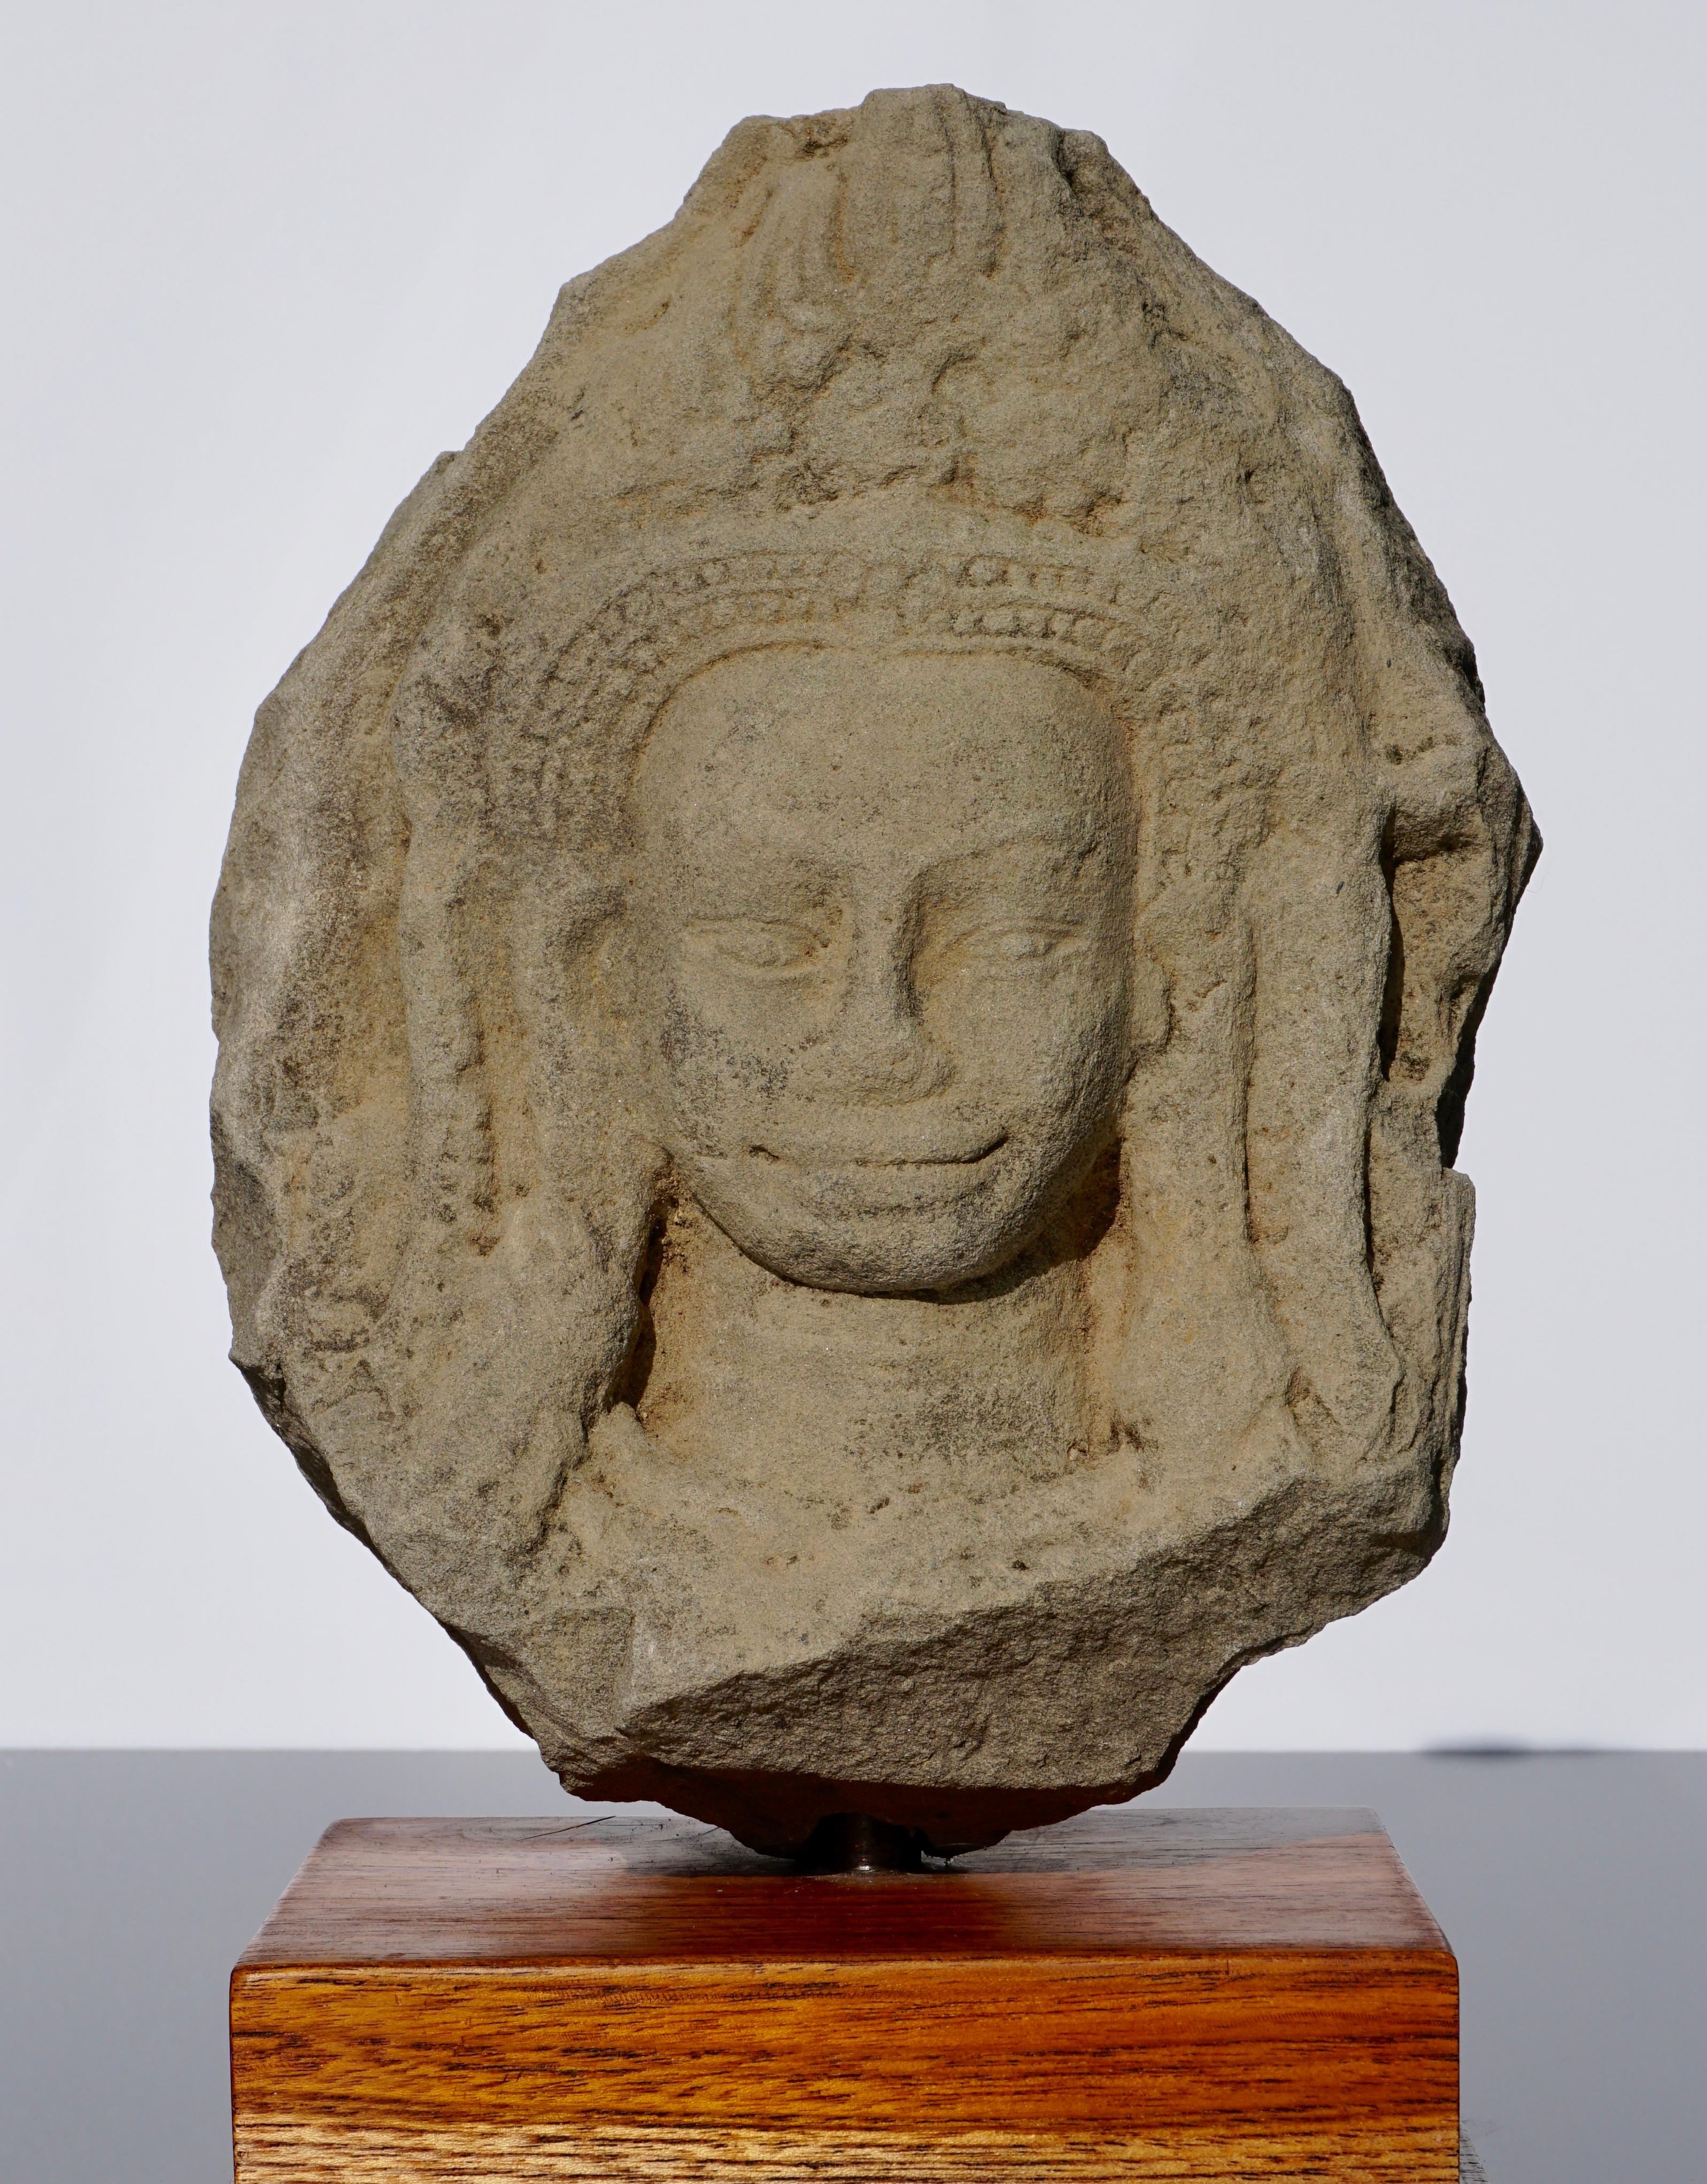 A large Cambodian Angkor Wat attributed sandstone head of an Apsara with an ornate flame crown. Mounted on a wood base, 12th century.

Measures: Height 11 x 9 inches
With stand 13.3 inches (34 cm)

Provenance: From a Canadian auction selling the